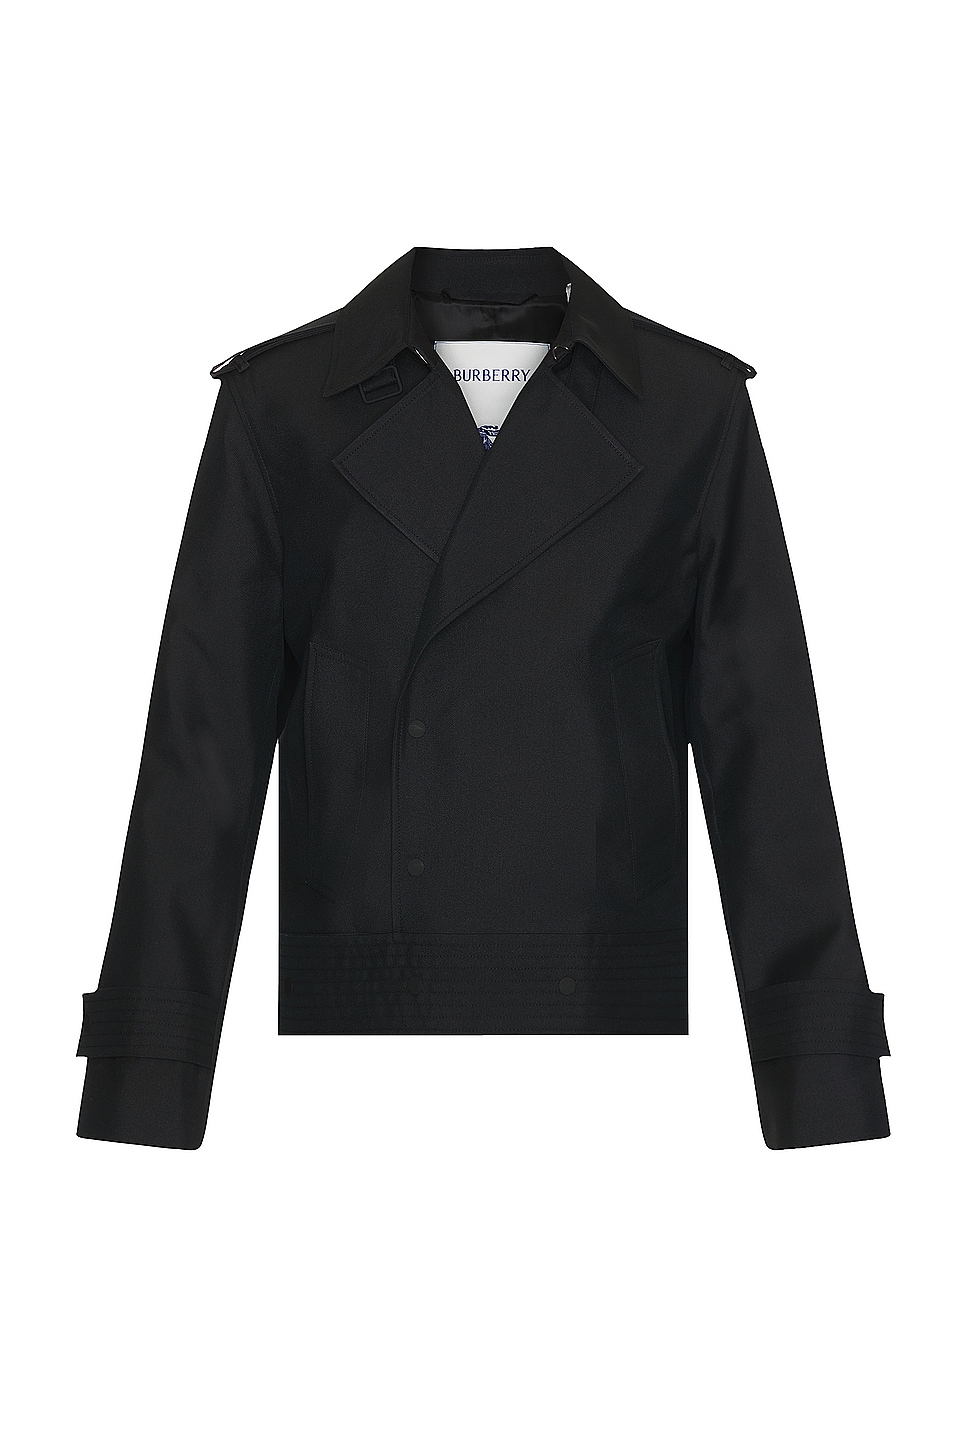 Image 1 of Burberry Bomber Jacket in Black